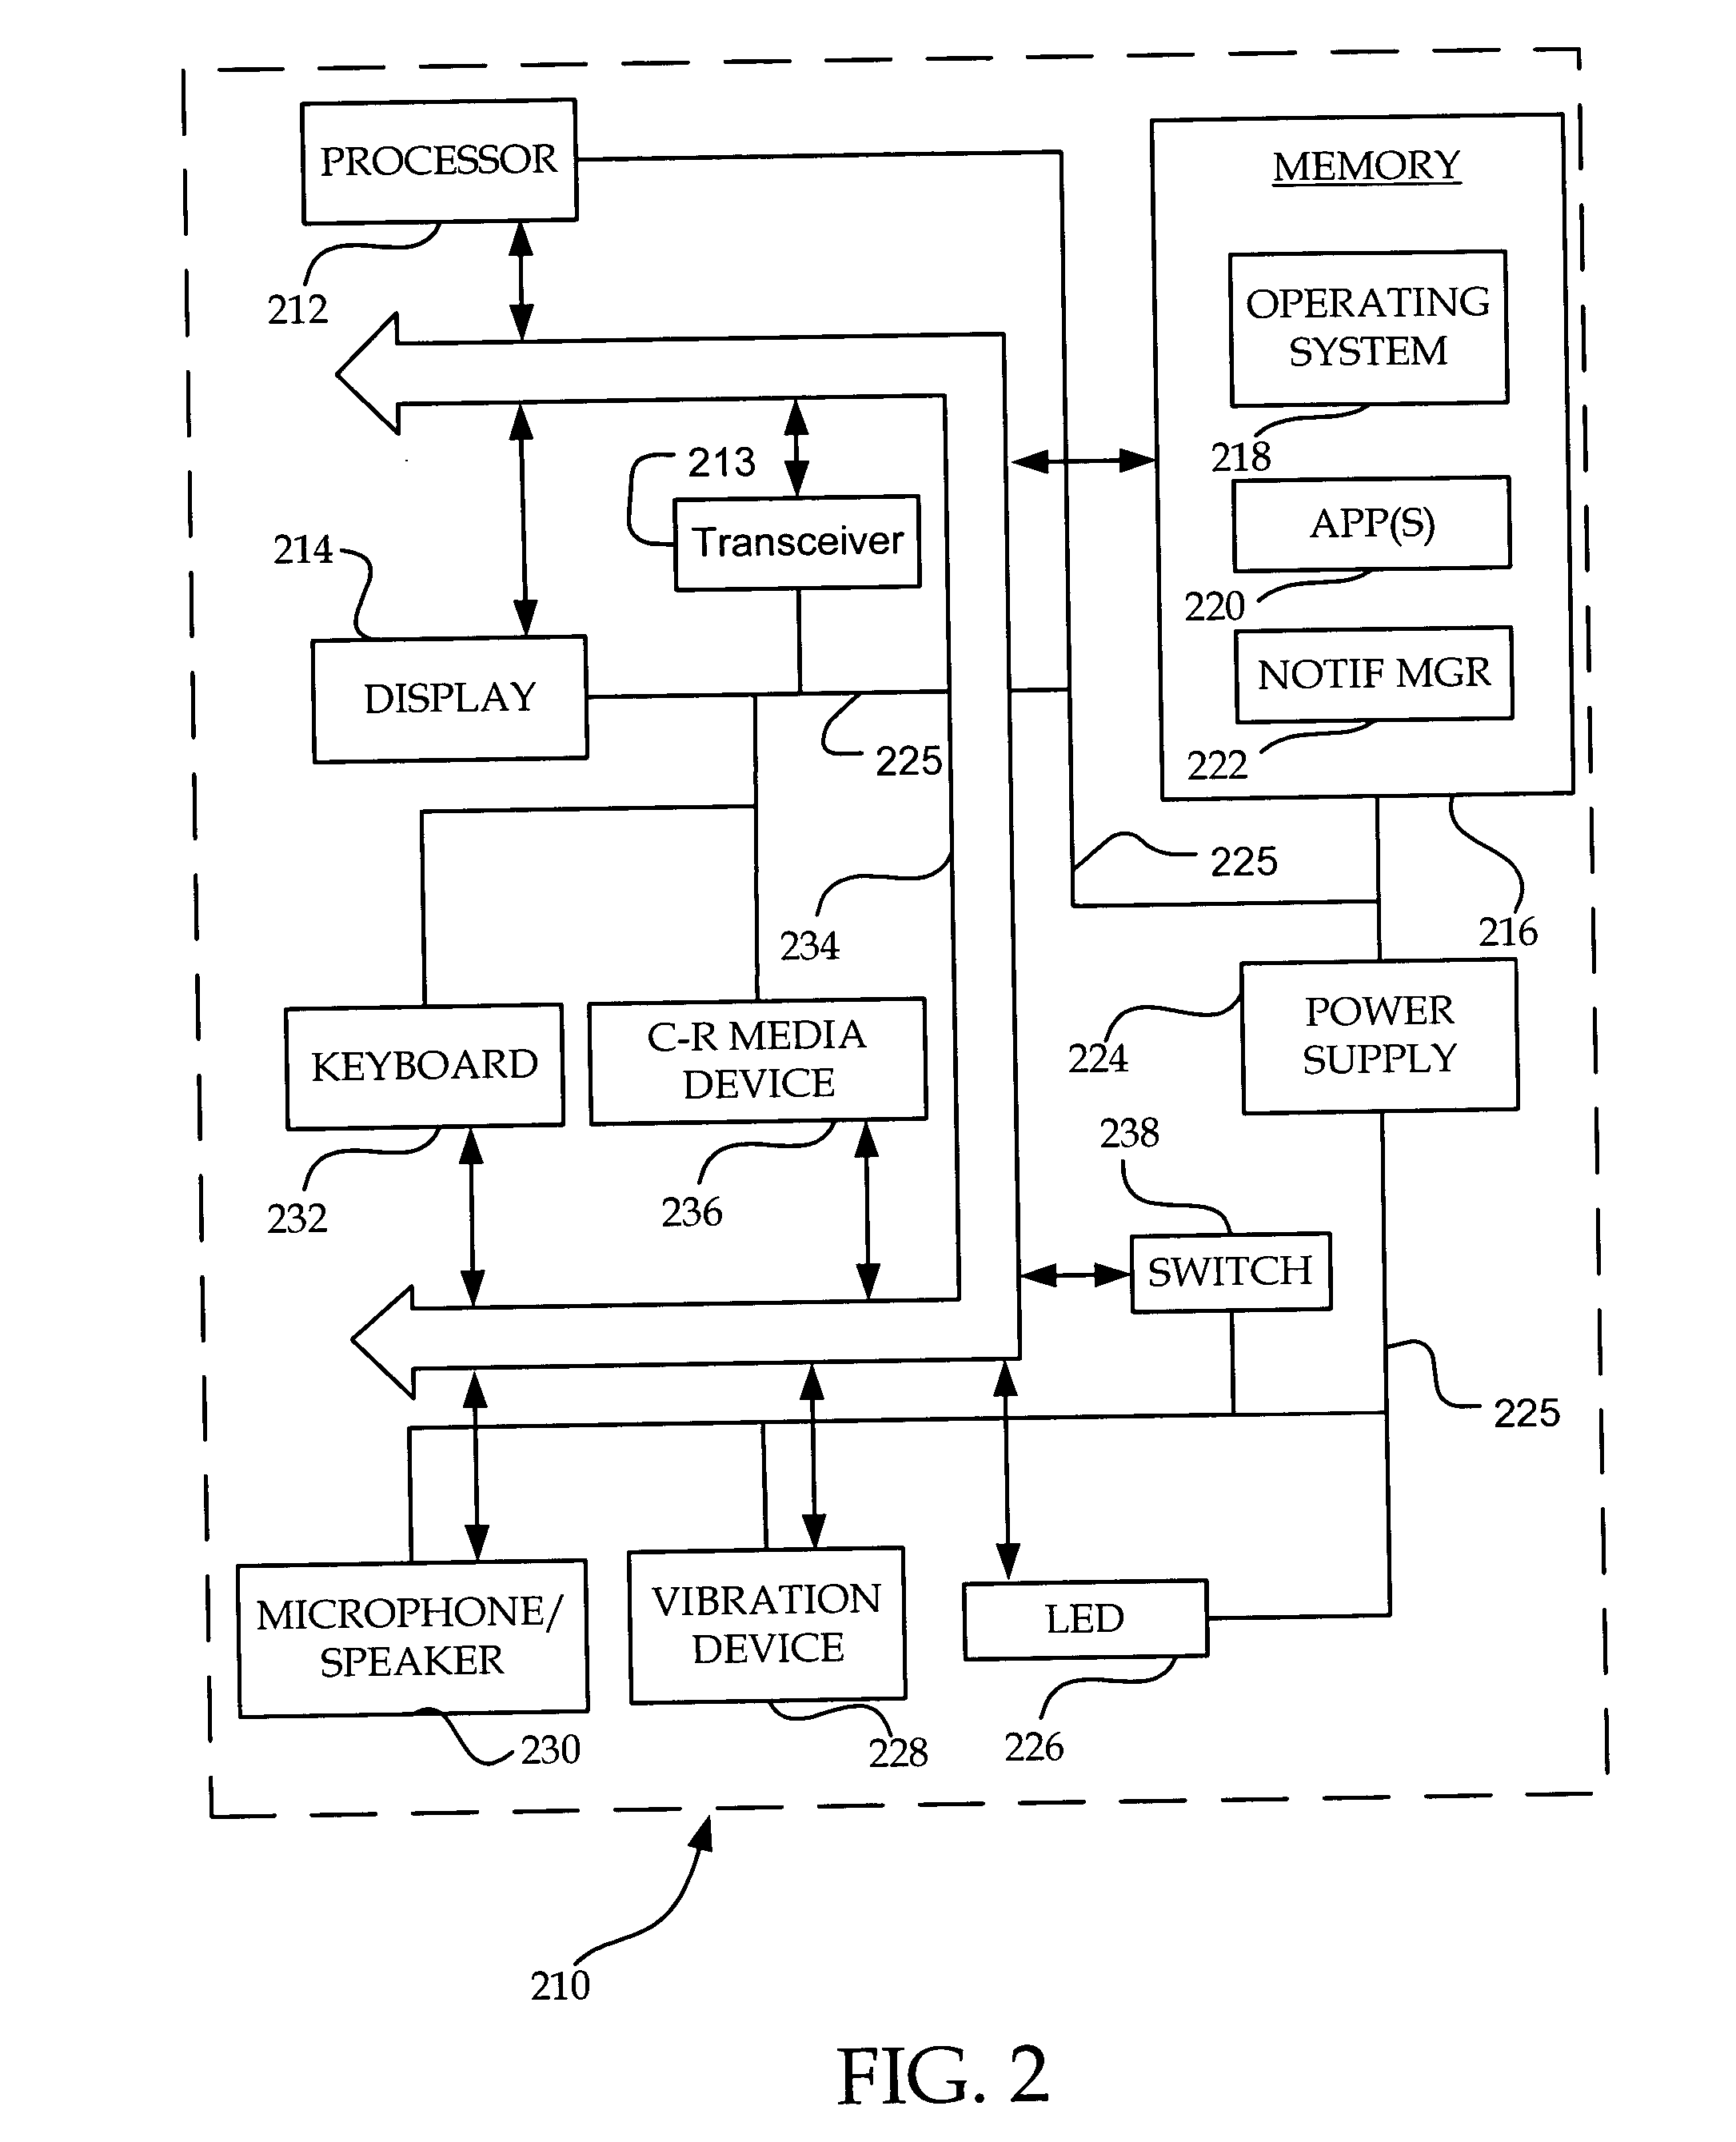 Method and system for personal policy-controlled automated response to information transfer requests